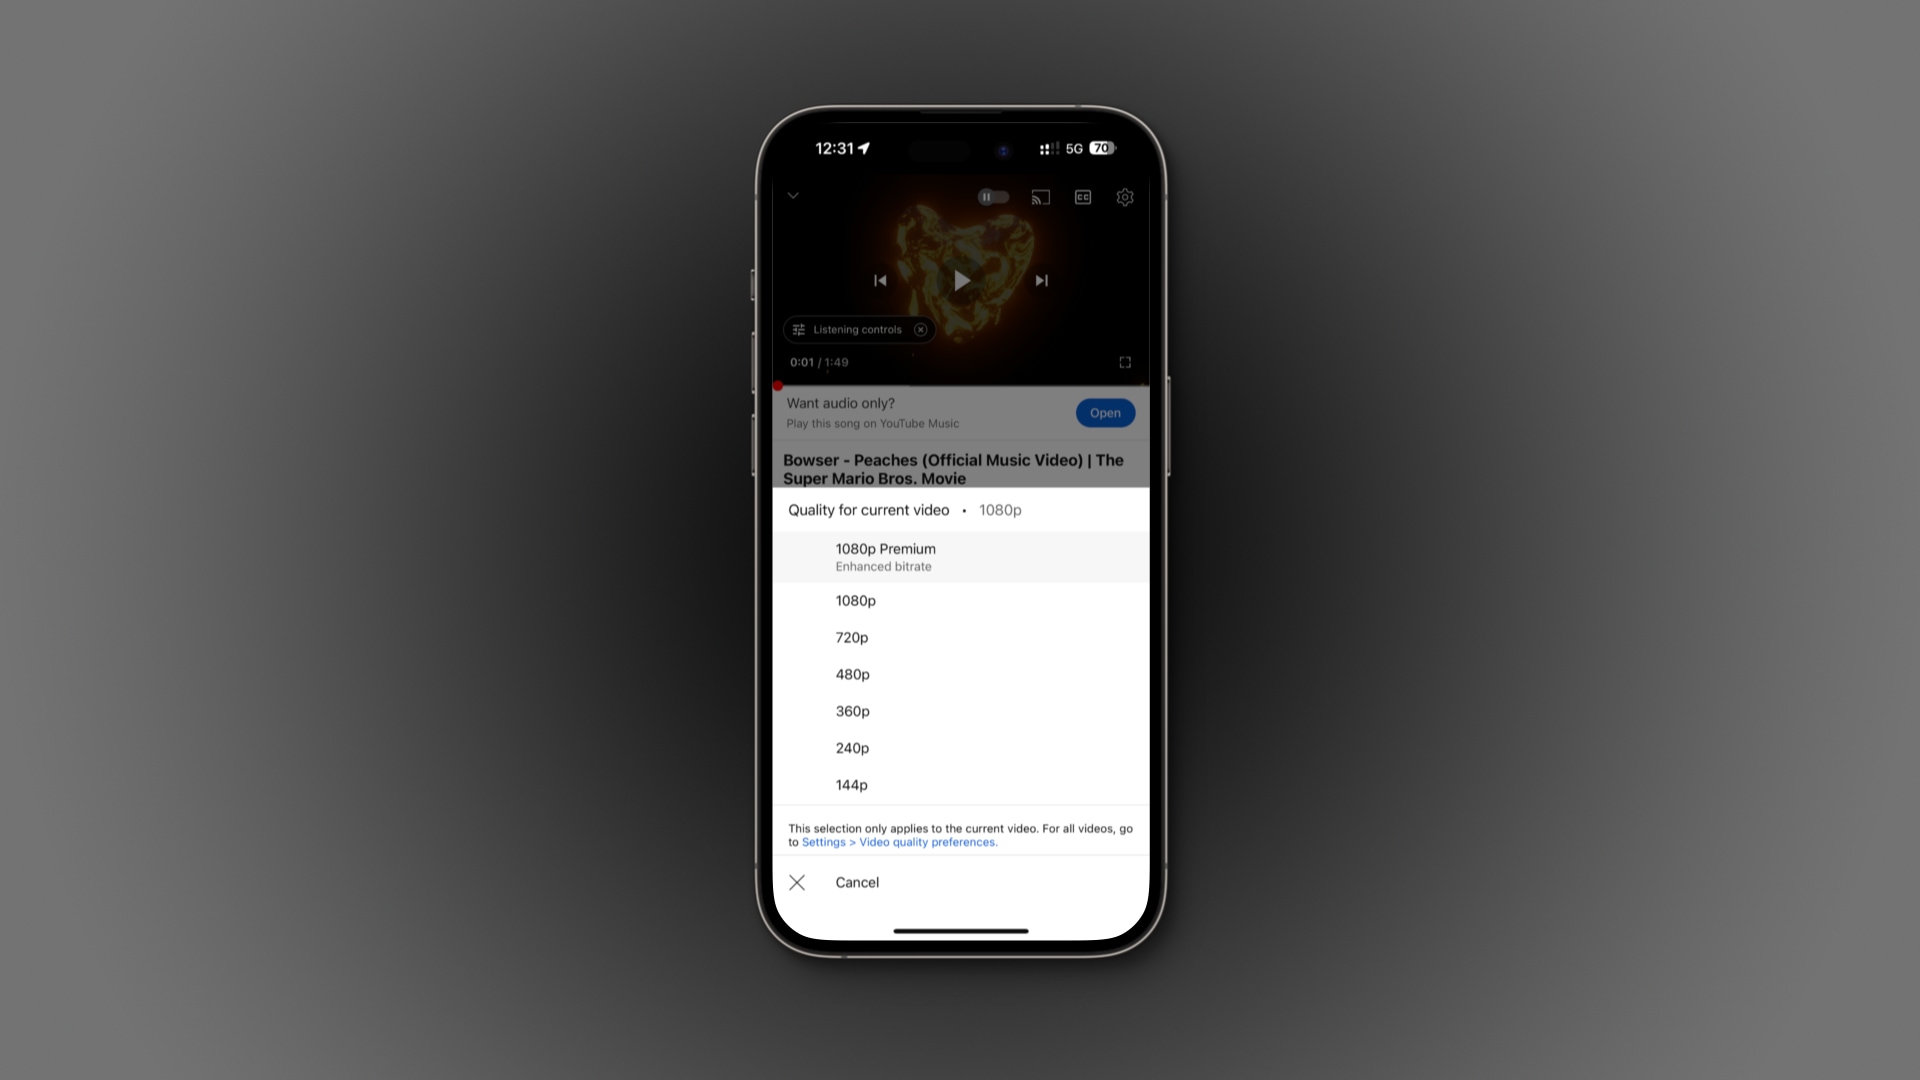 Video quality settings in YouTube's iPhone app with the 1080p Premium option selected